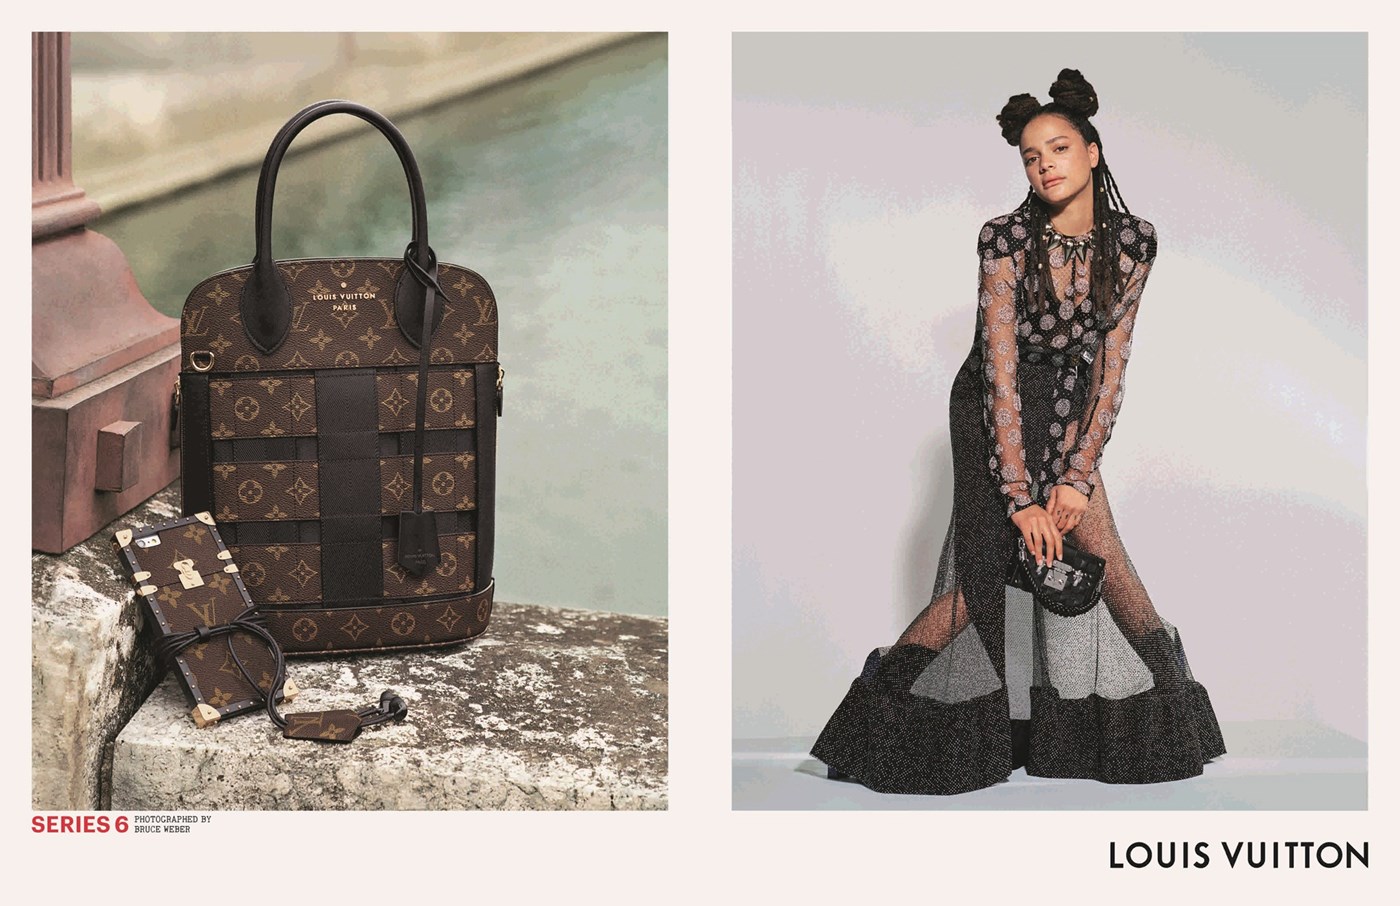 Louis Vuitton releases their latest advertising campaign starring